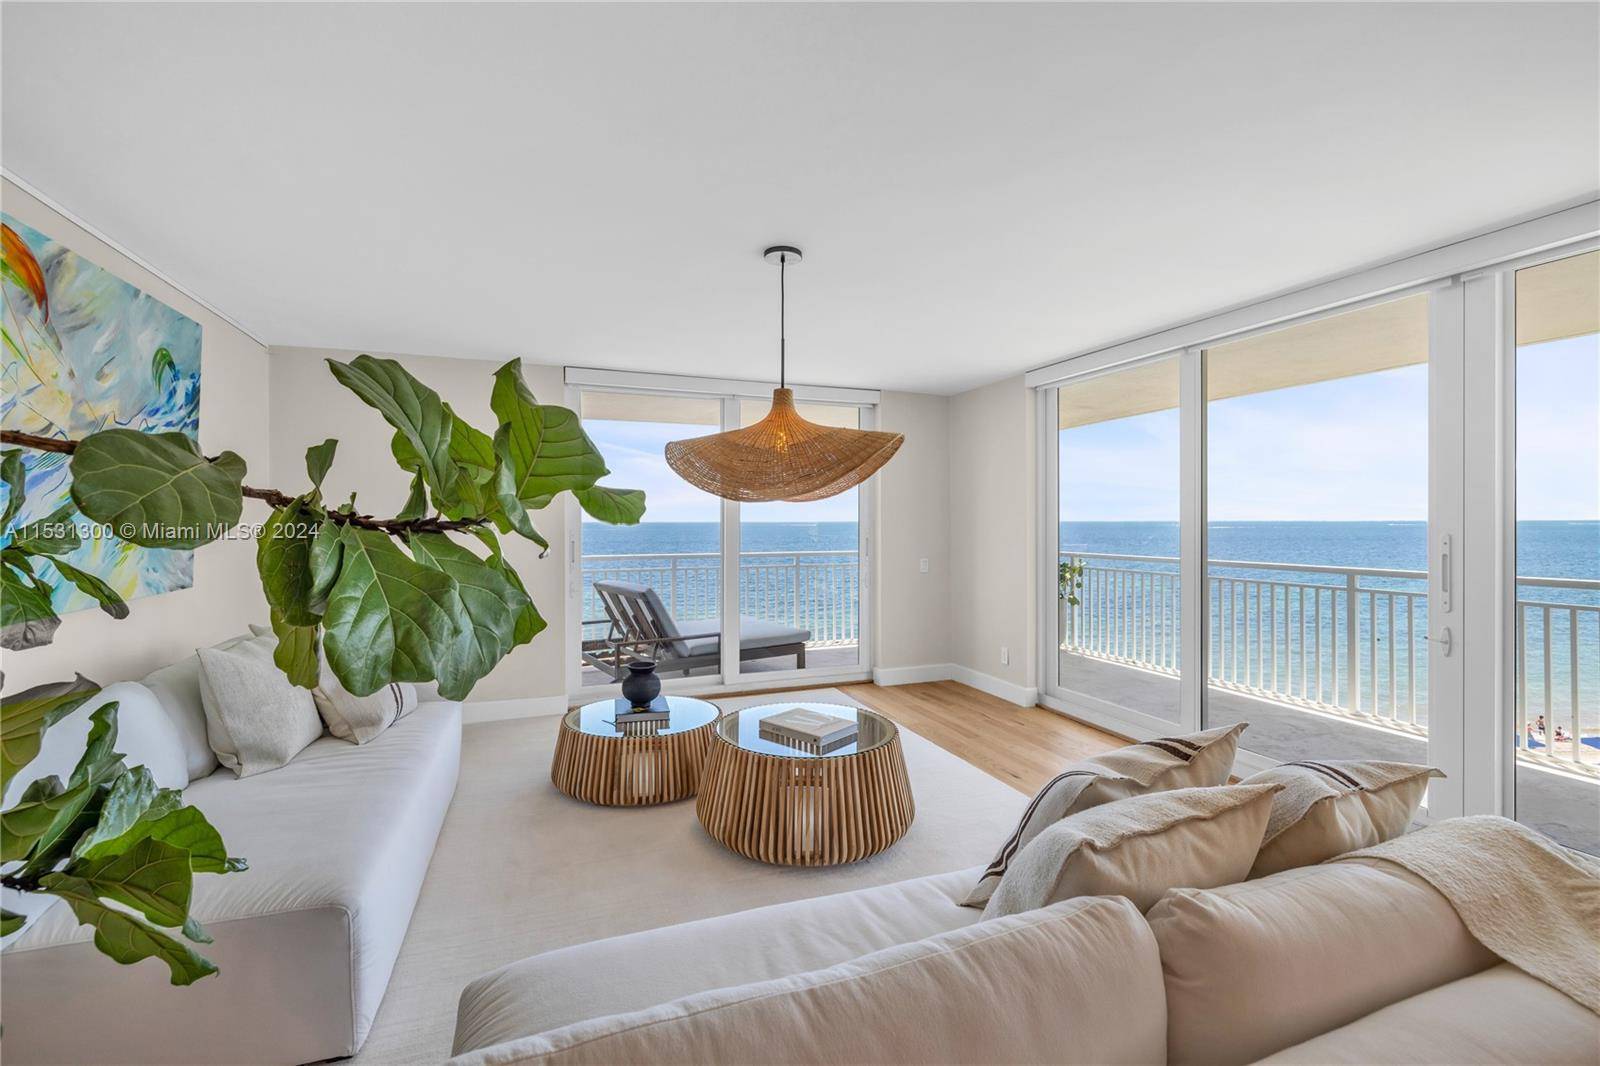 Spend your vacations or seasonal rent in a gem oceanfront paradise Condo, just steps from Key Biscayne Beach, and known luxury hotel, located in Sands of Key Biscayne A Line ...